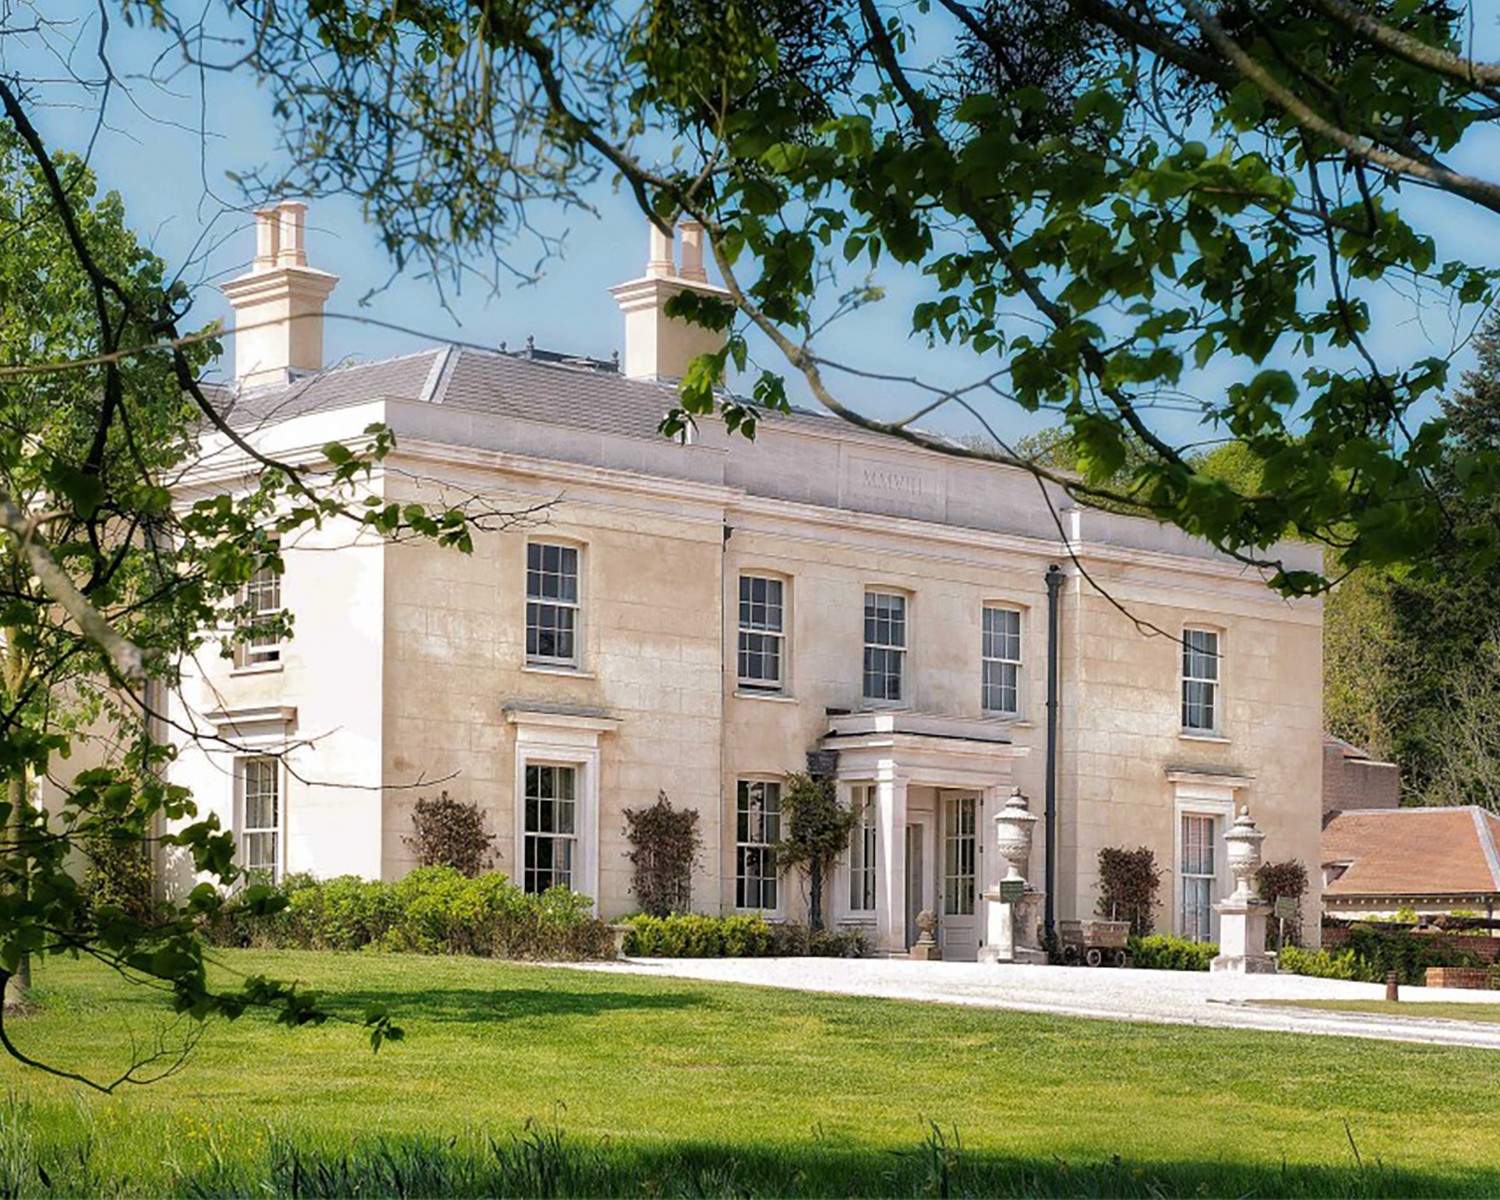 New Forest's Lime Wood Hotel and Spa